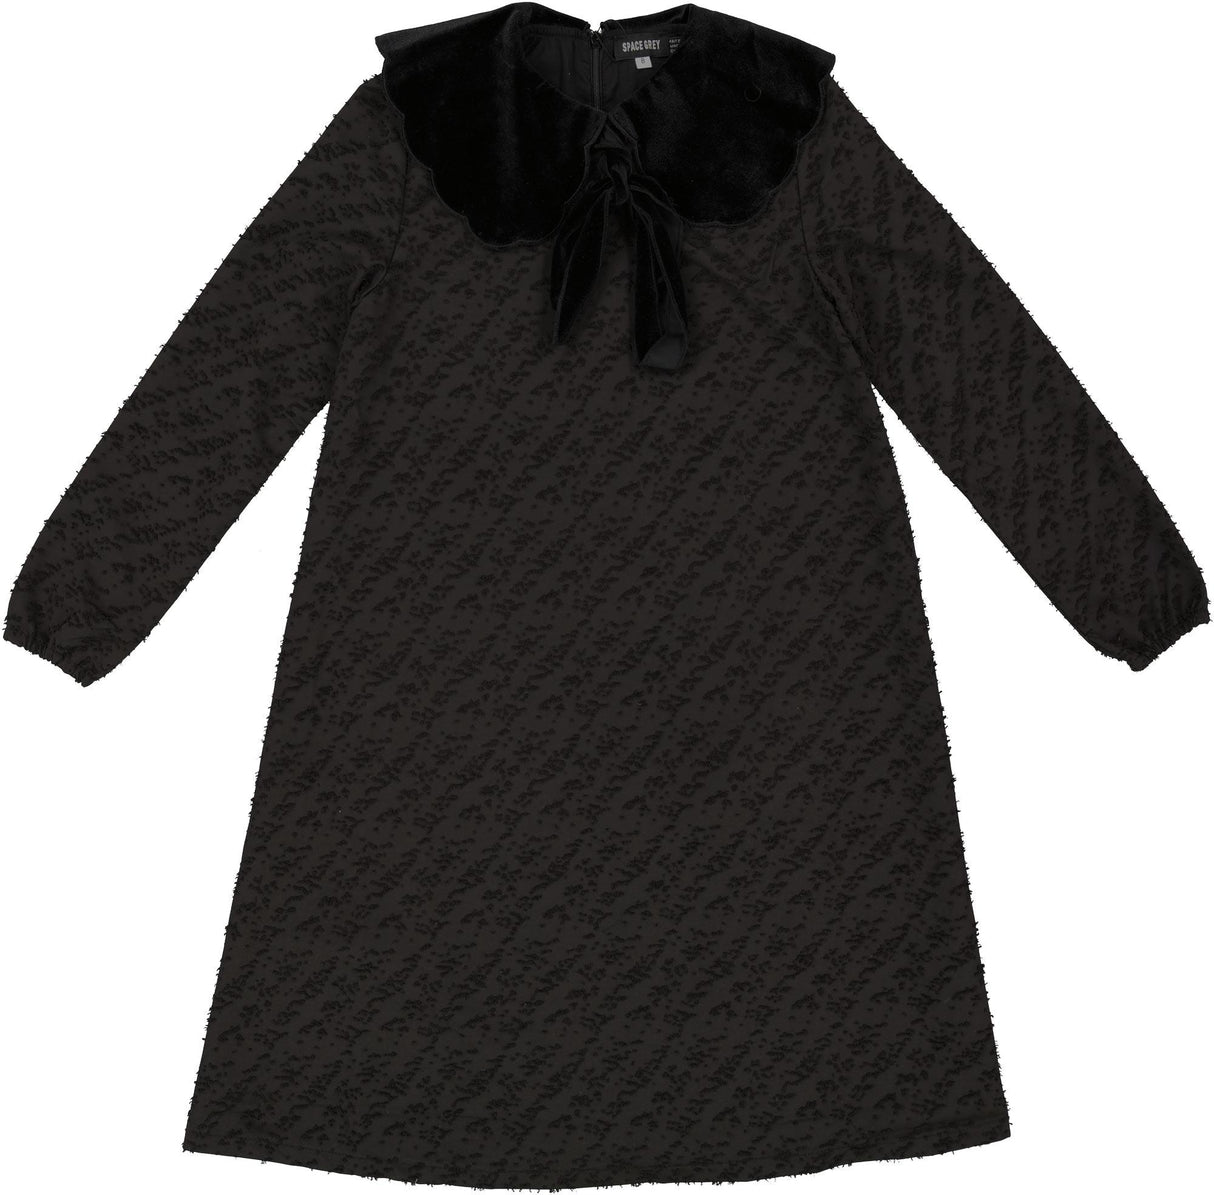 Space Gray Girls Scalloped Collar Dress - WB3CY2127